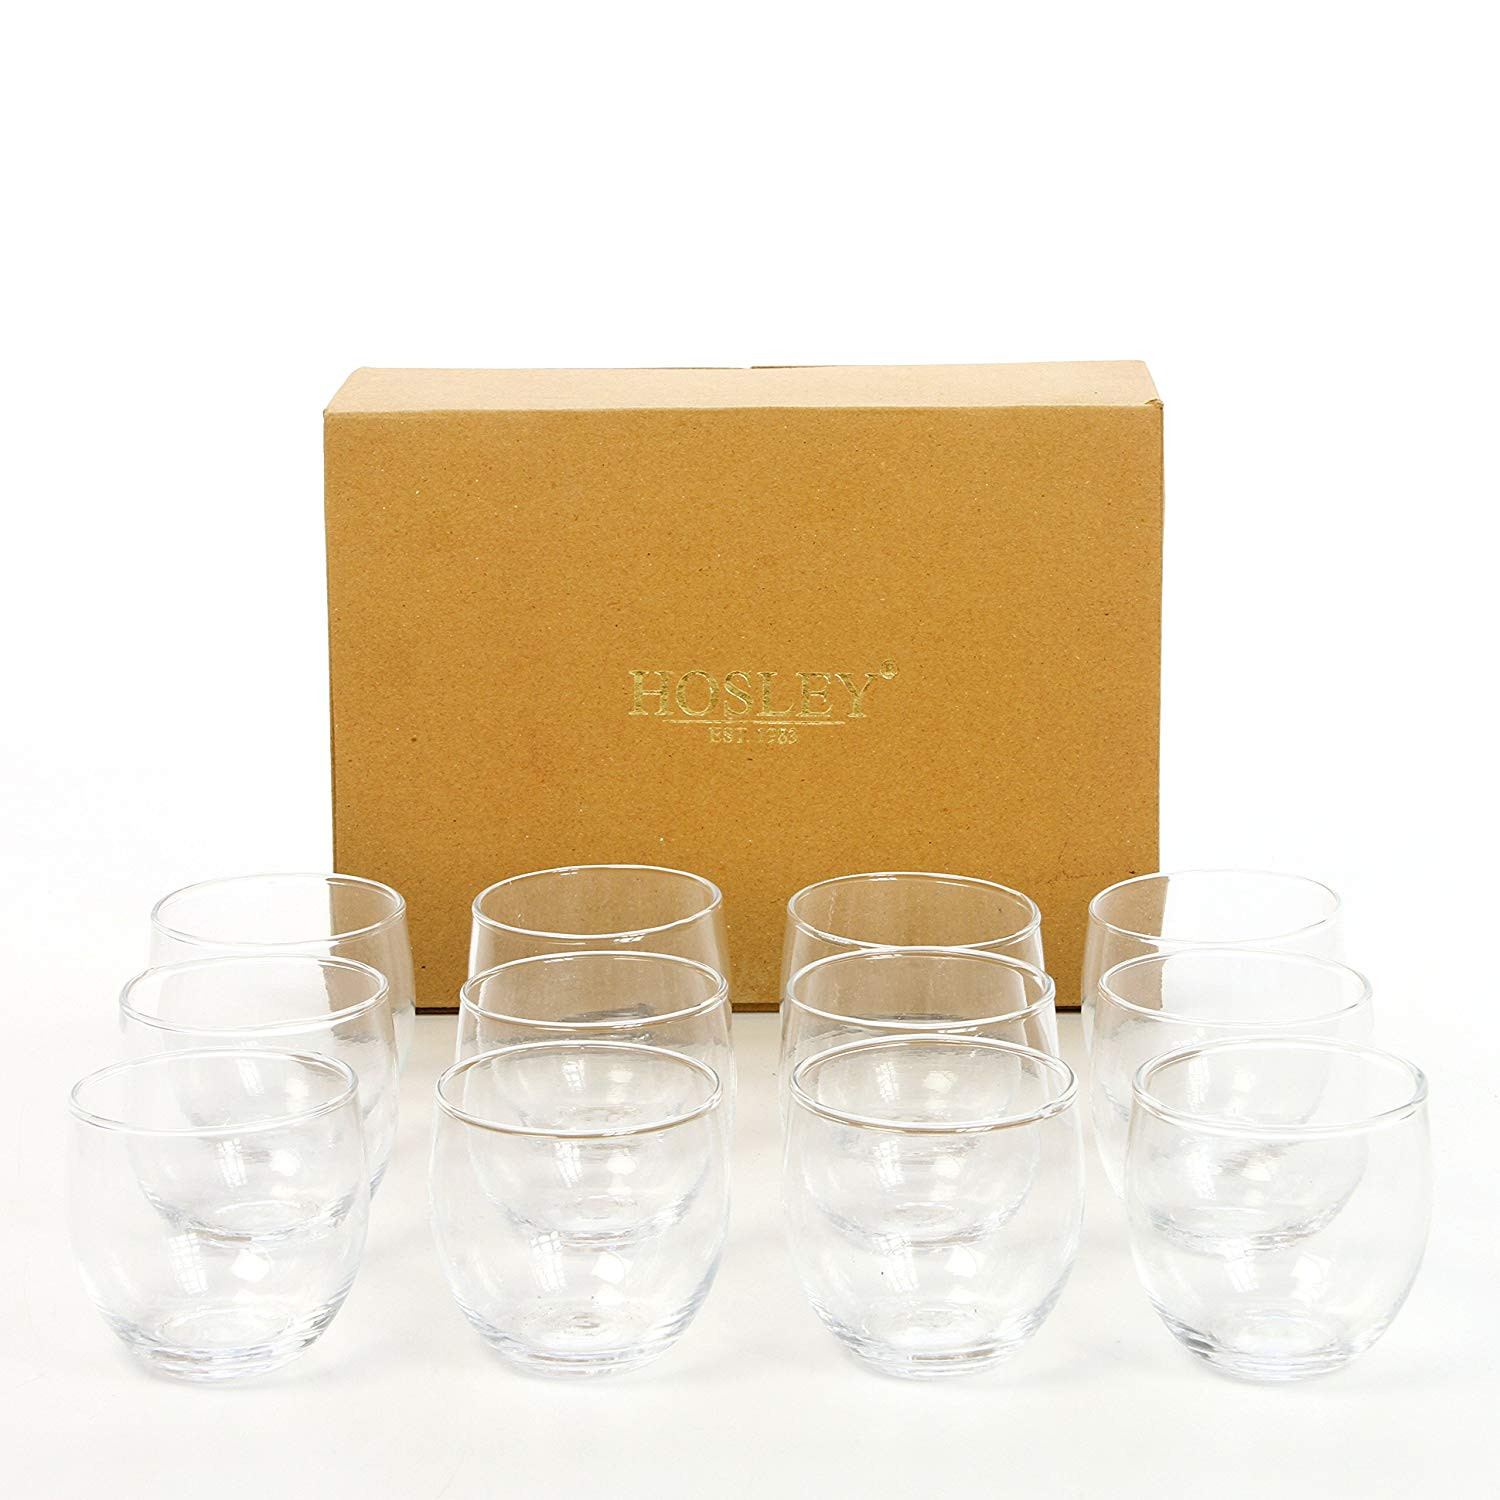 26 Stylish Floating Candle Vases Uk 2024 free download floating candle vases uk of hosleys set of 12 clear glass tea light holders 2 5 diameter pertaining to hosleys set of 12 clear glass tea light holders 2 5 diameter roly poly style ideal gift